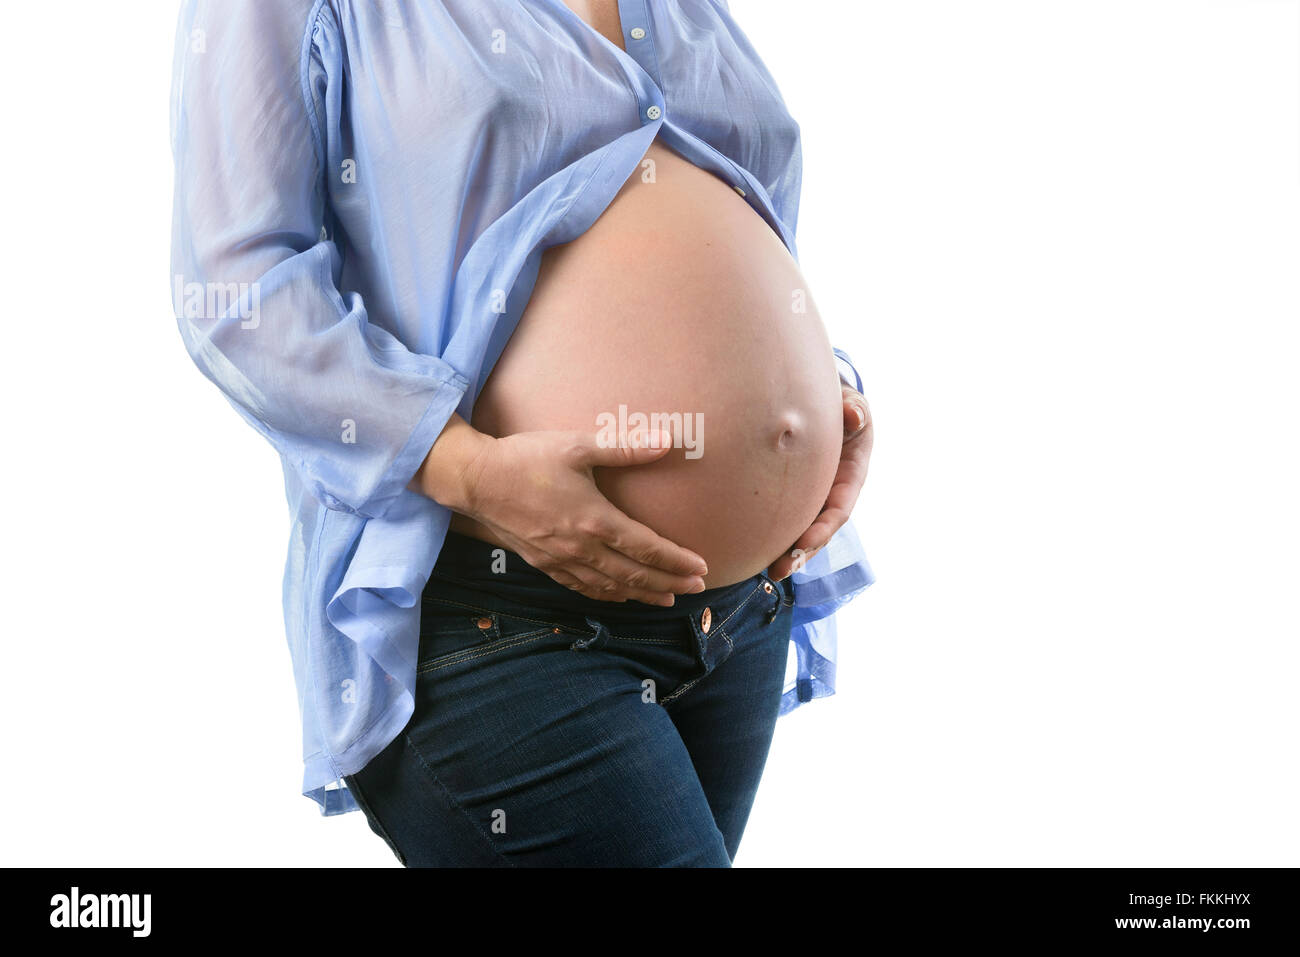 Pregnant woman belly blue shirt Stock Photo